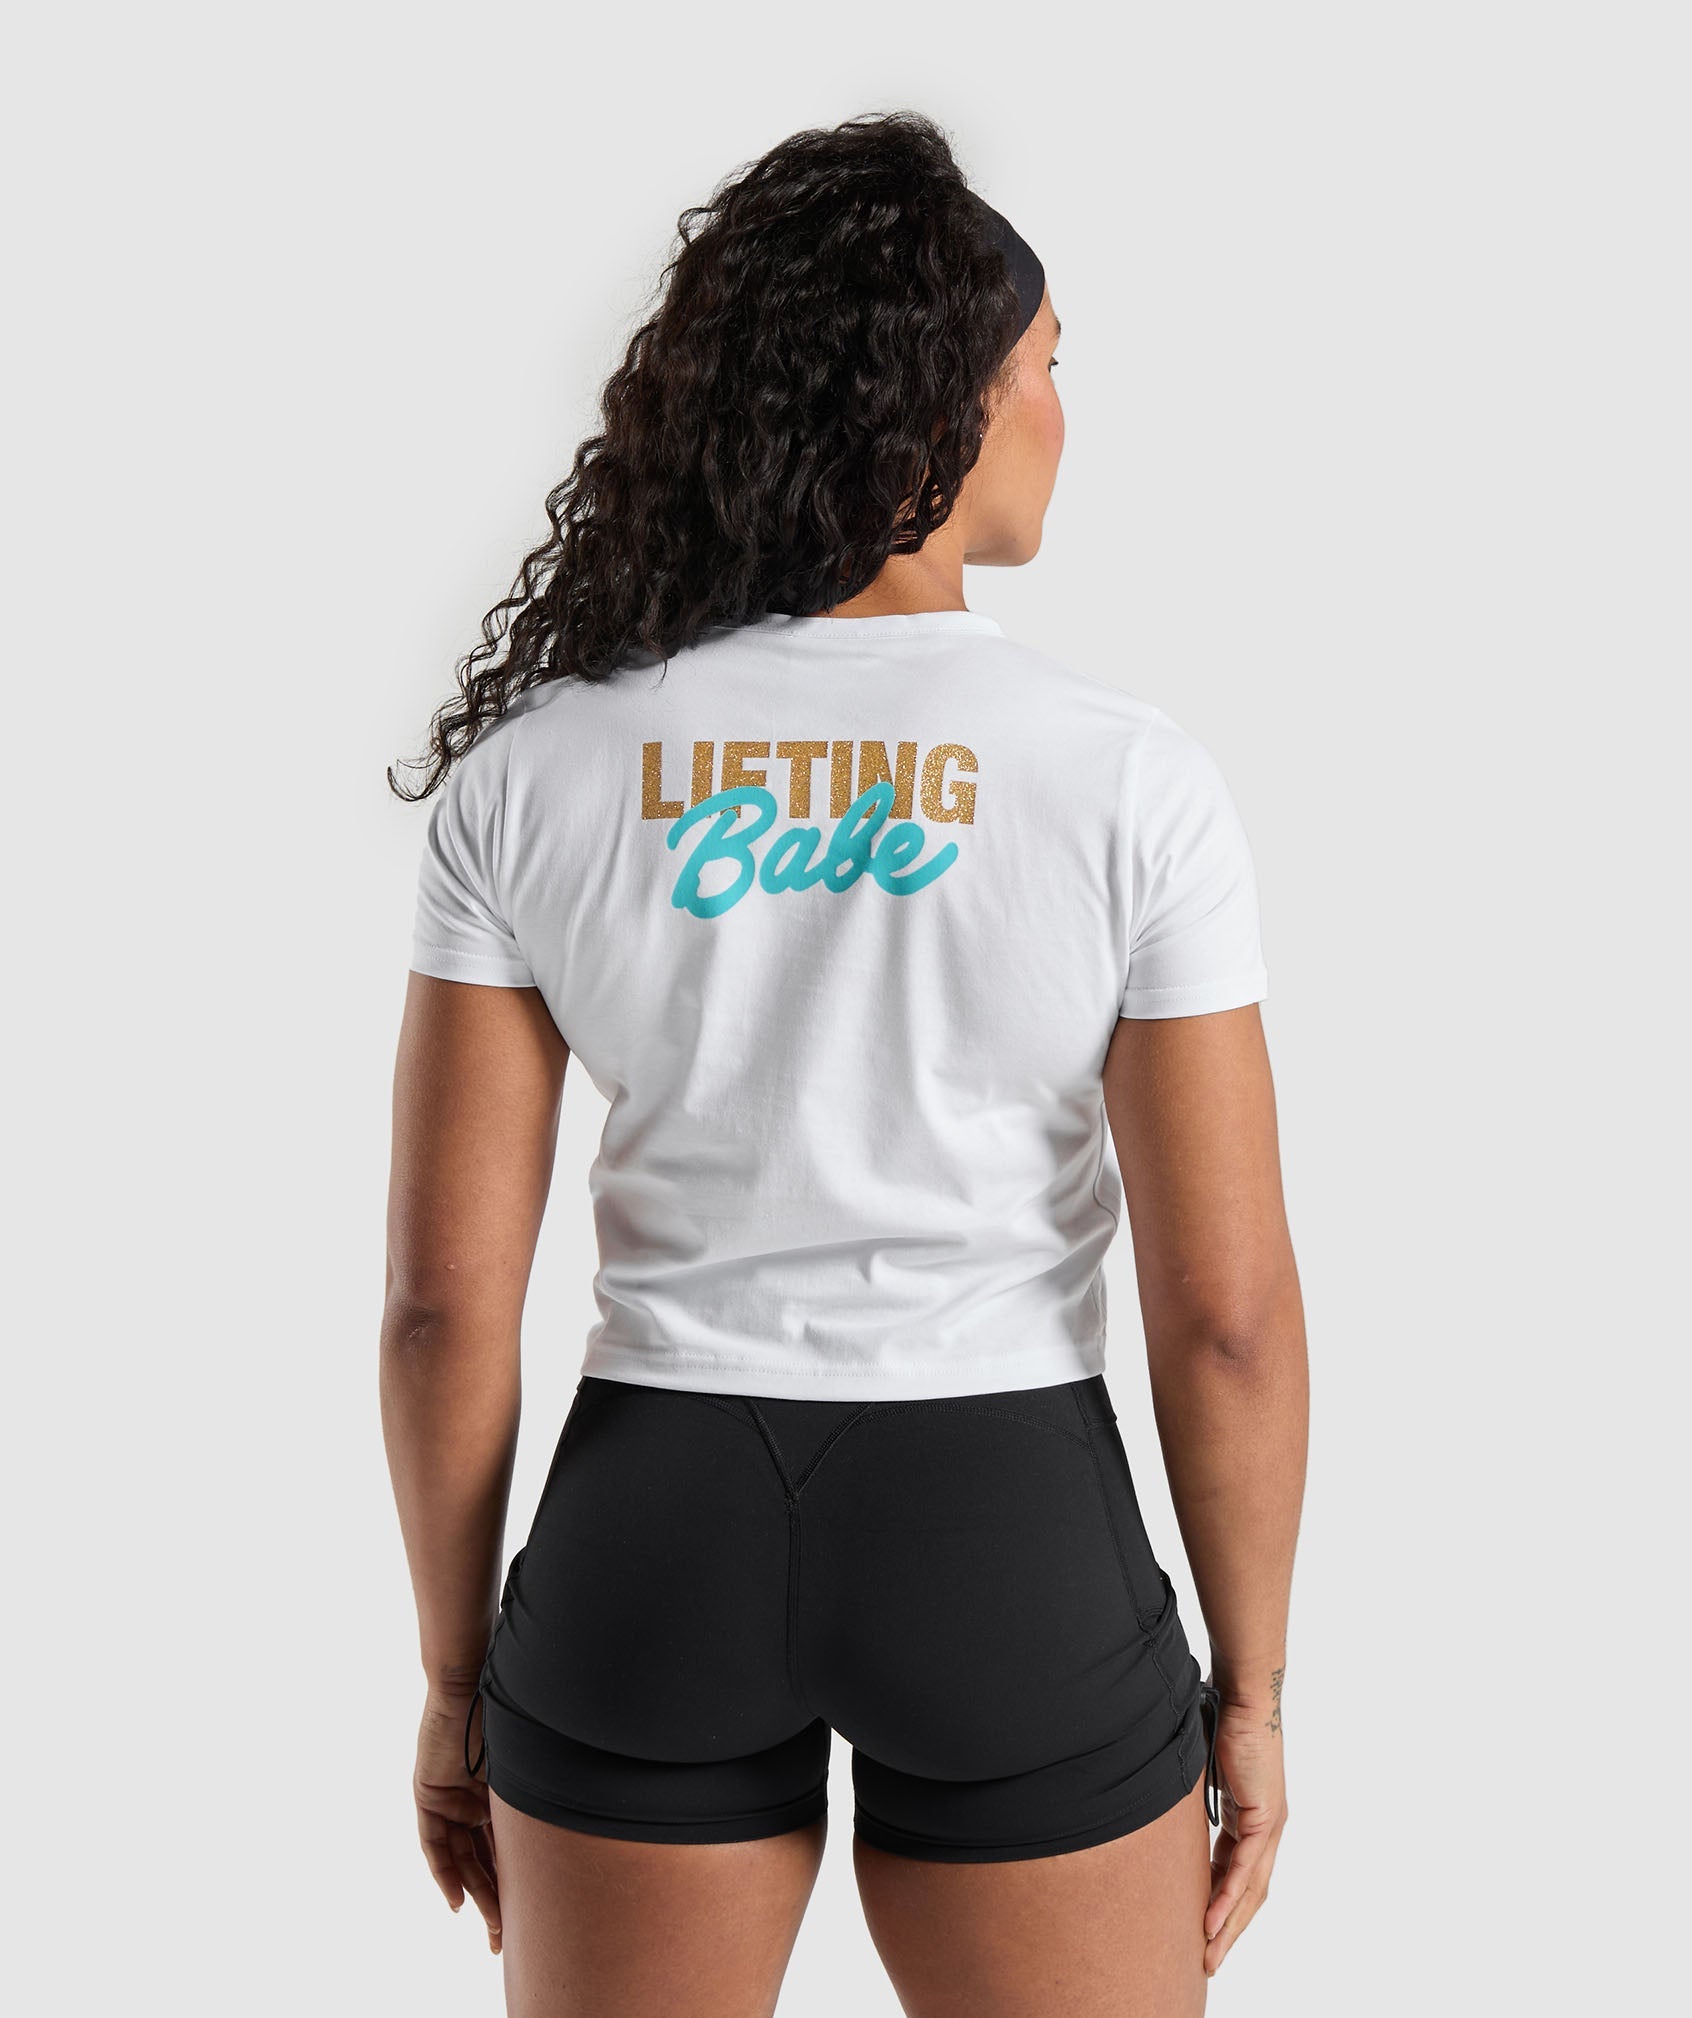 Lifting Babe Tee in White - view 1